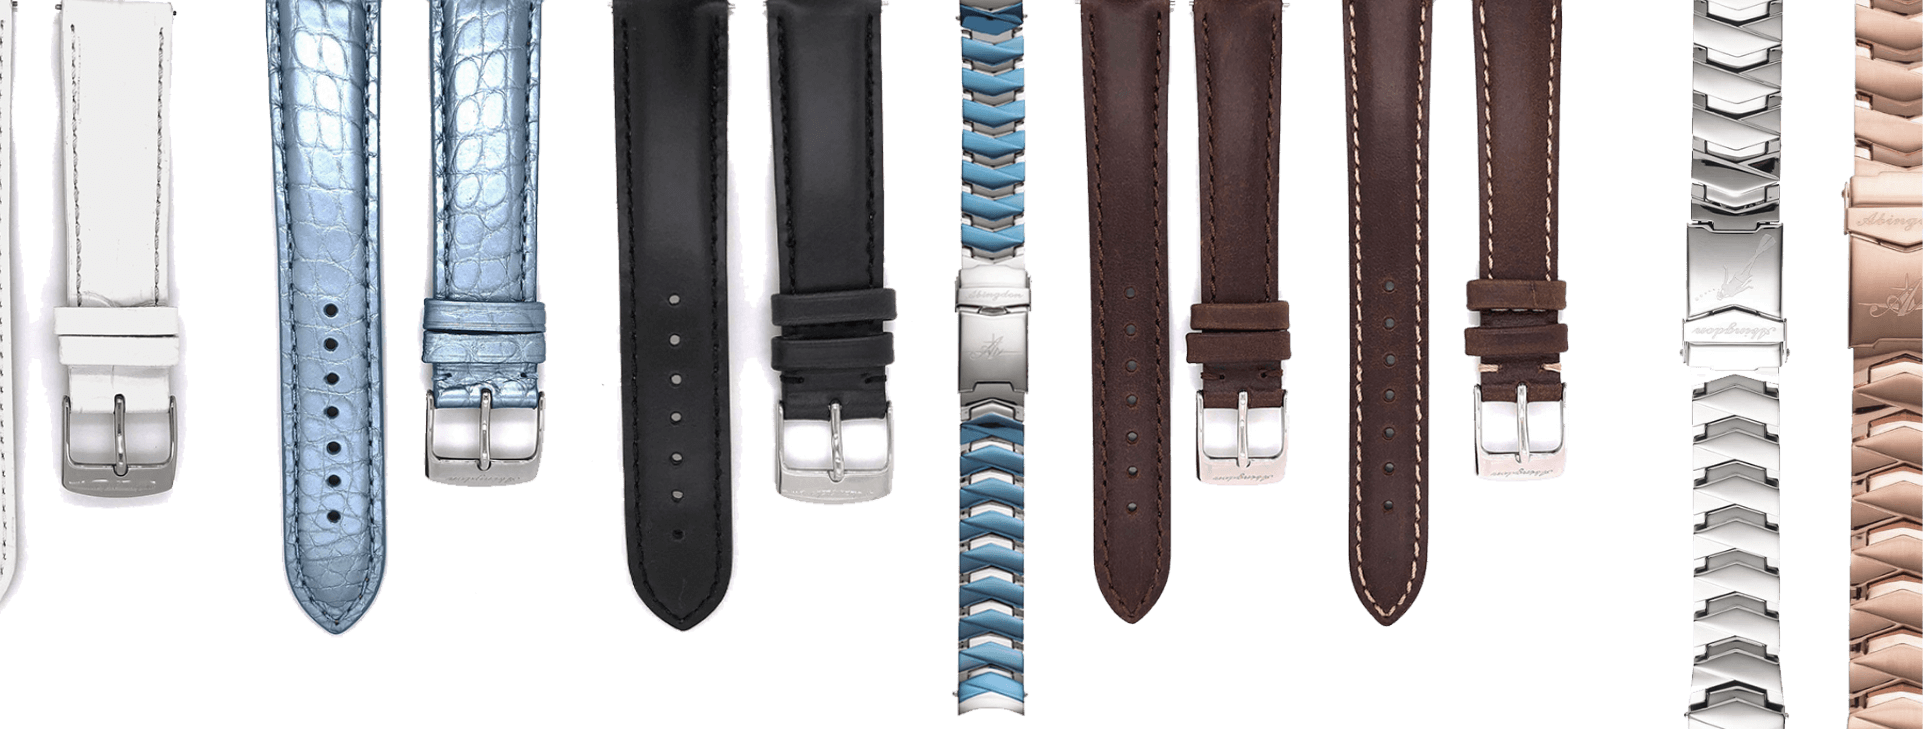 Variety of leather, silicone, metal, and alligator watch straps that can all be changed out easily with quick change release spring bars.